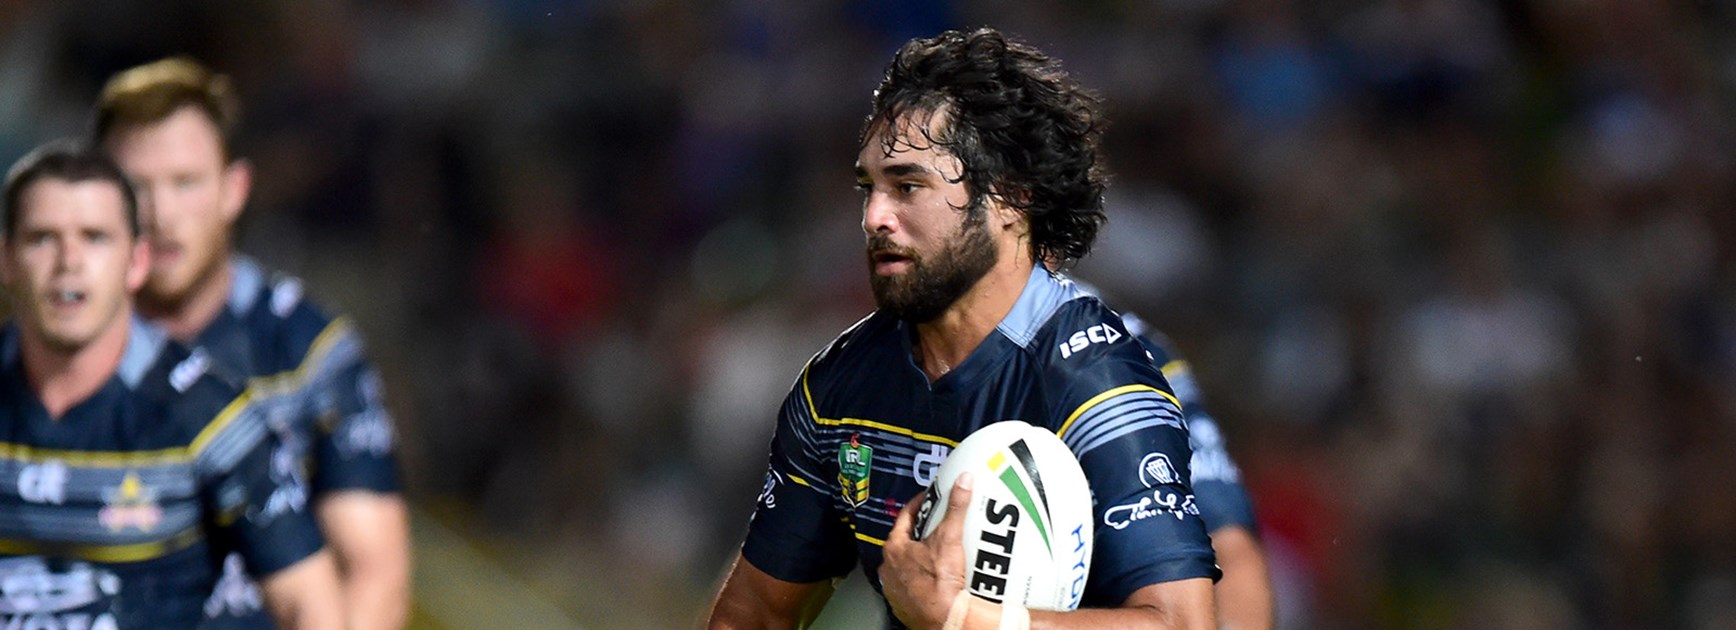 North Queensland's Javid Bowen was impressive on debut against the Dragons in Round 5 of the Telstra Premiership.